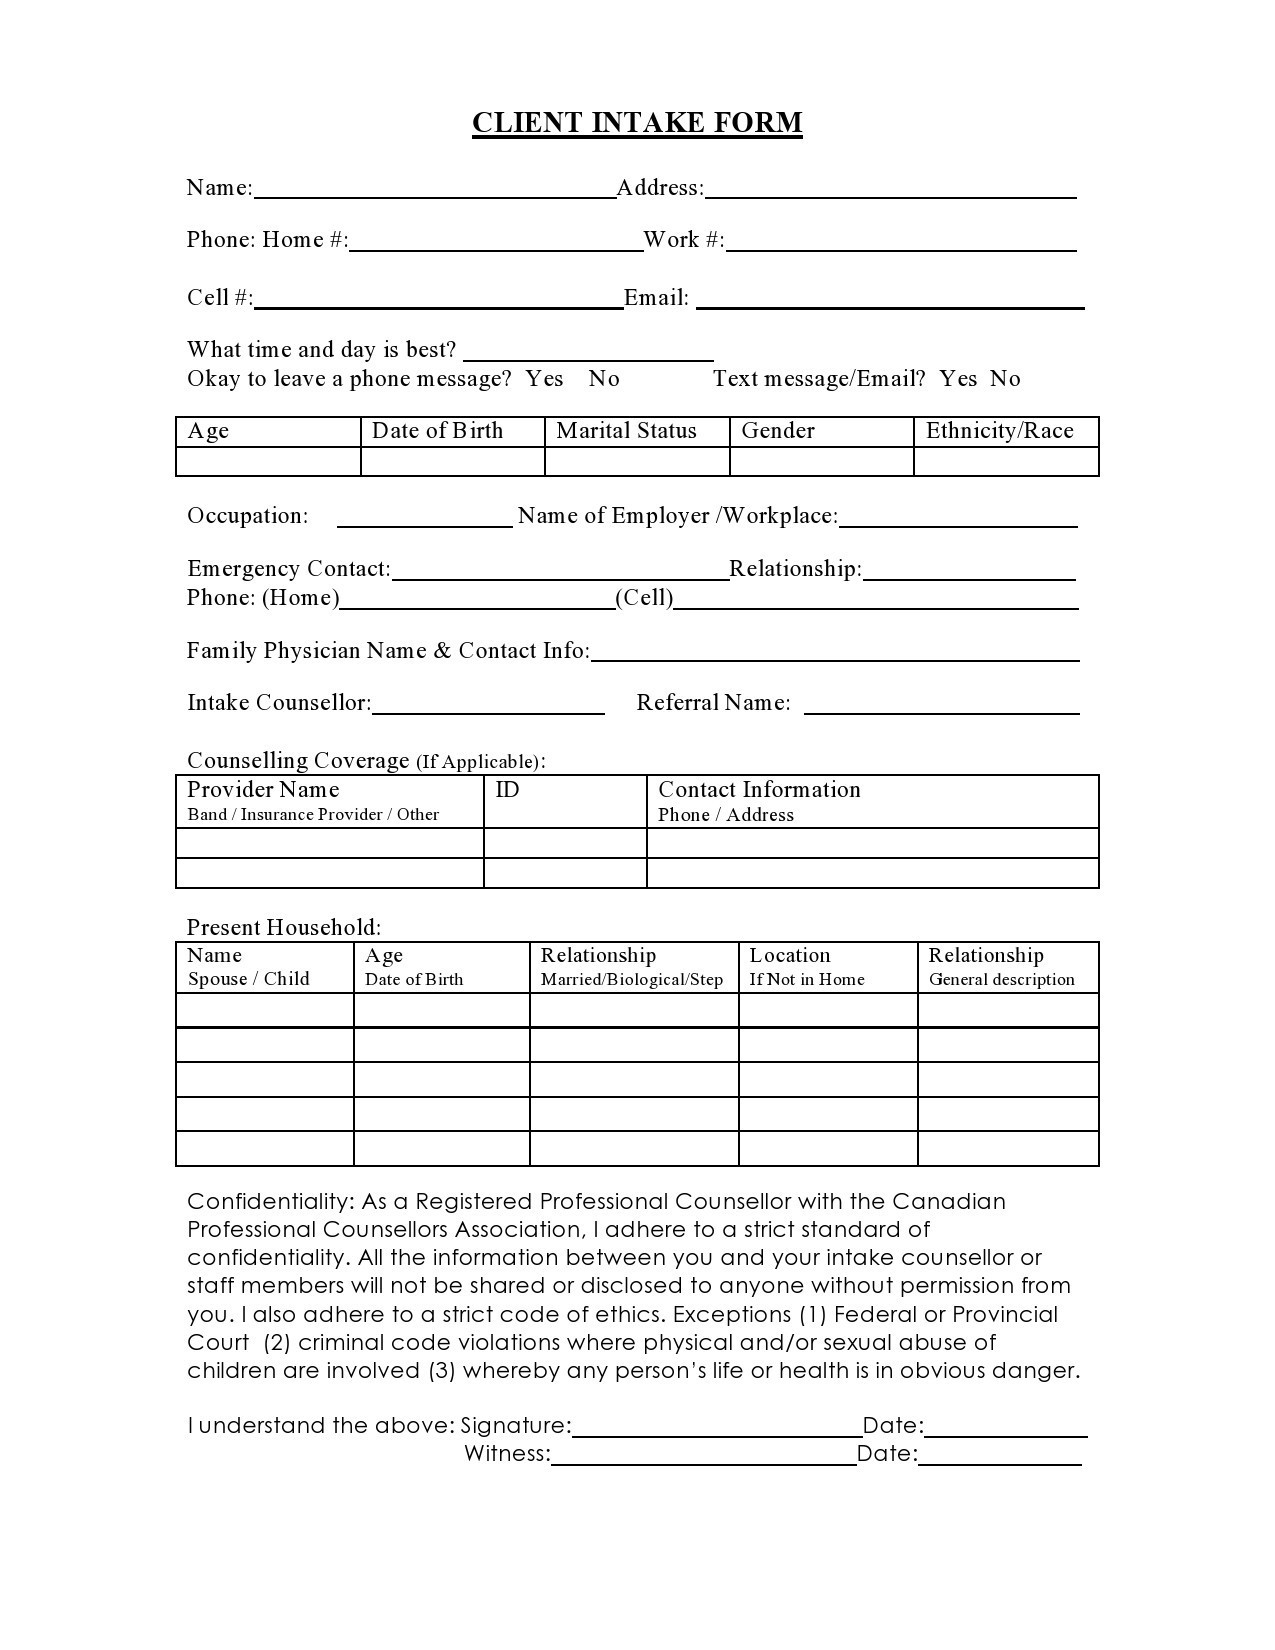 Free client intake form 30